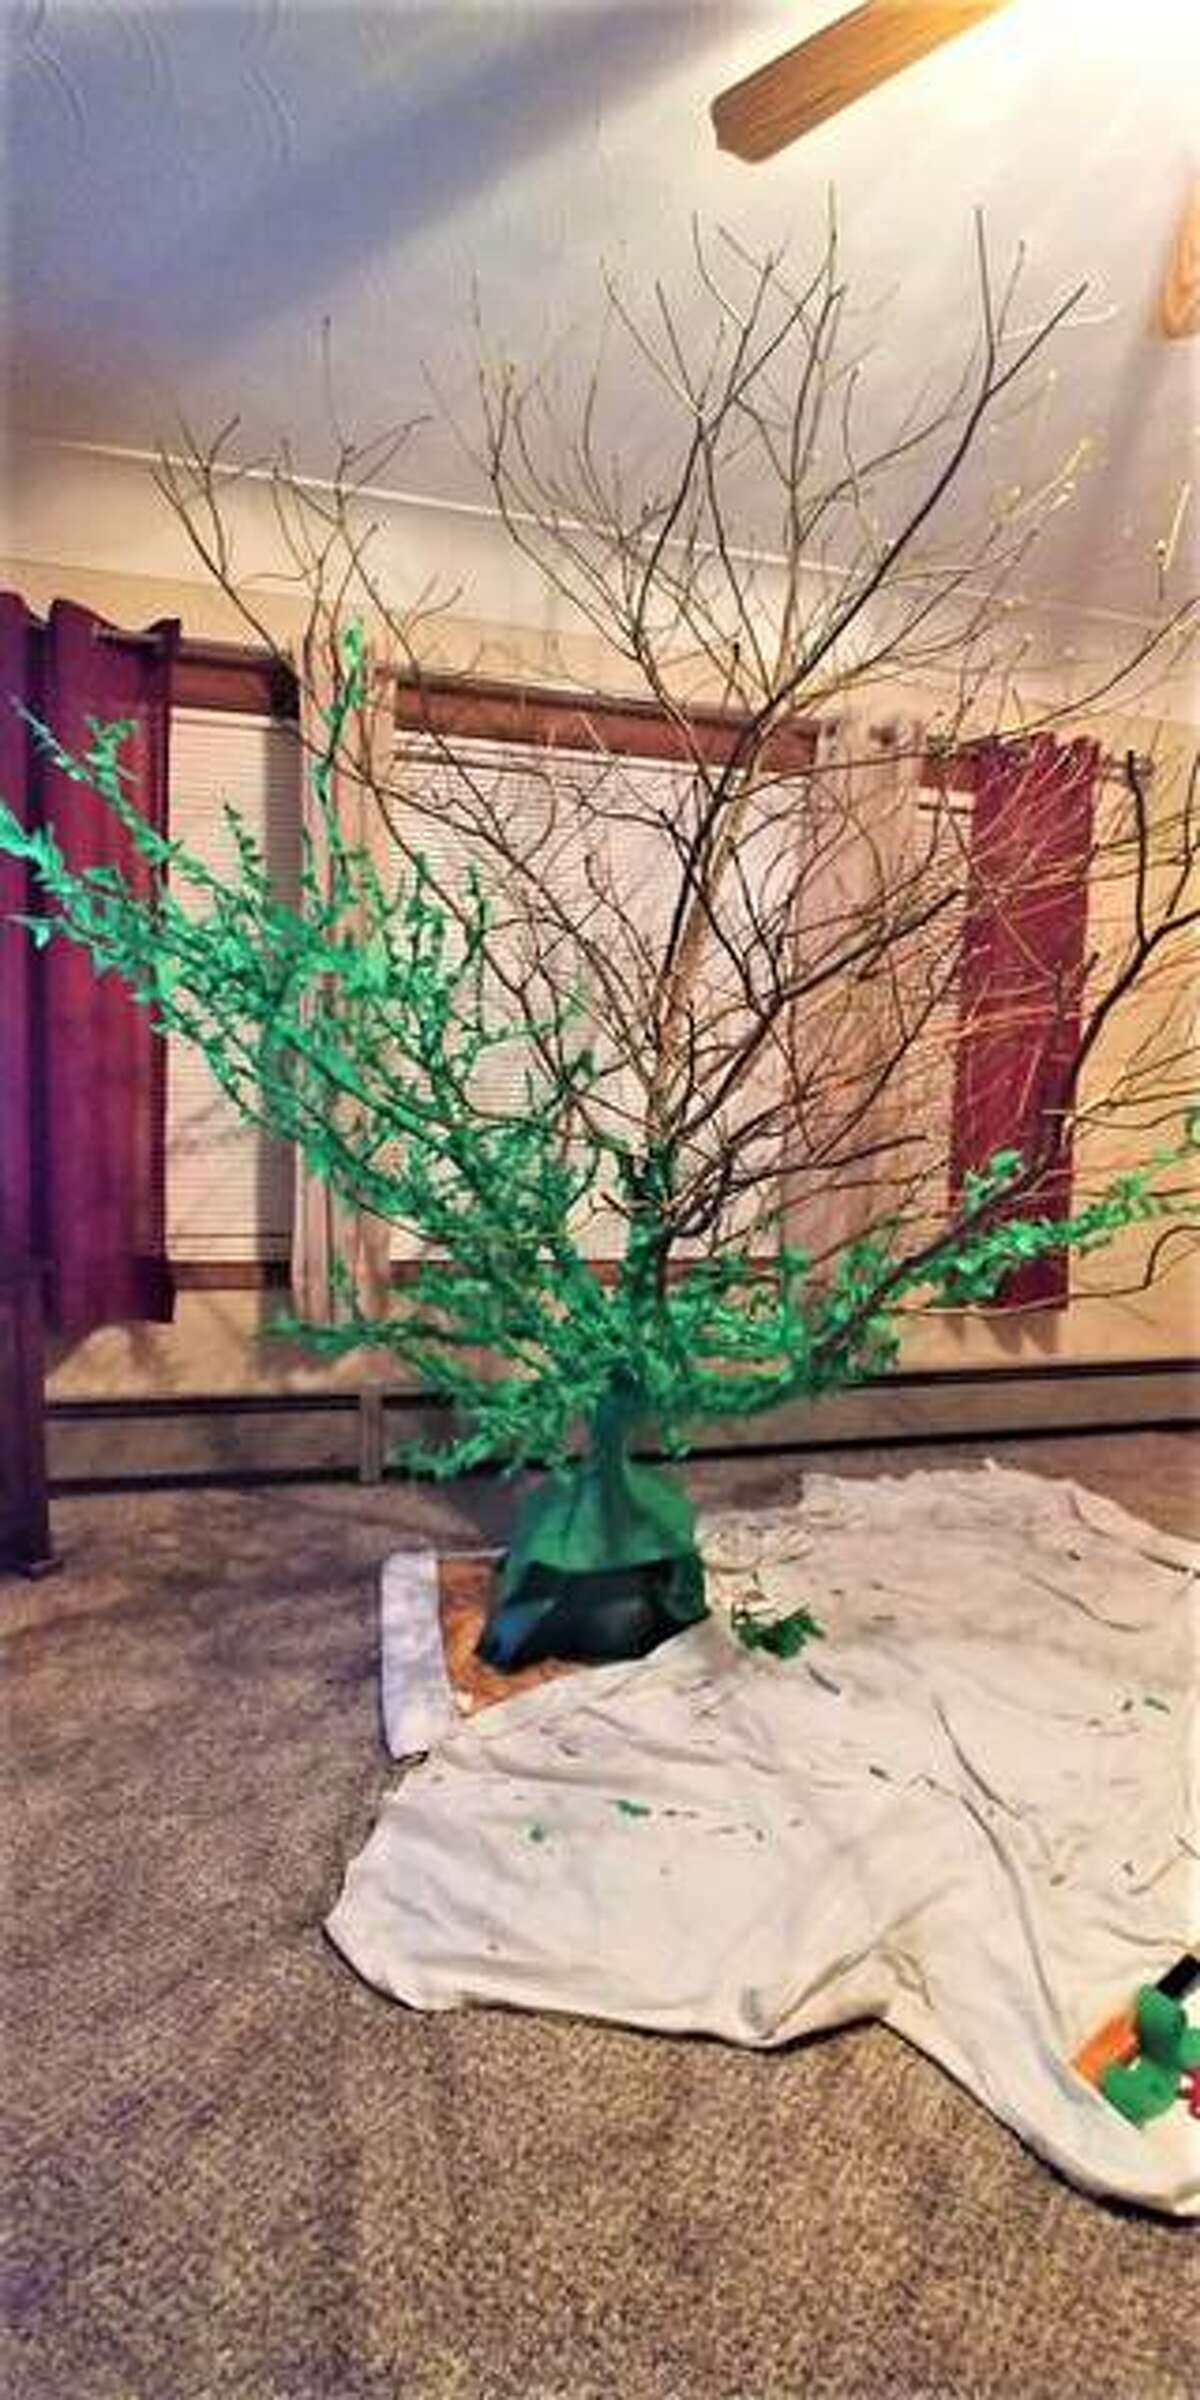 The two trees that formed Diana Sugg’s sassafras Christmas tree required 31 hours of crepe paper wrapping. She and her mother, Carol Rives, then spent 12 hours decorating the completed tree.